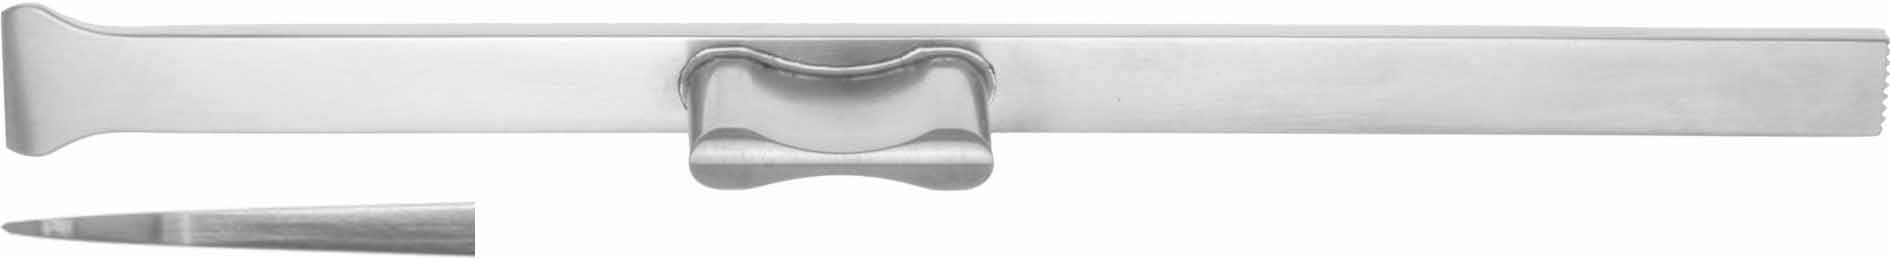 RUBIN OSTEOTOME 160MM, STRAIGHT, WIDTH 12MM, WITH STABILIZER 